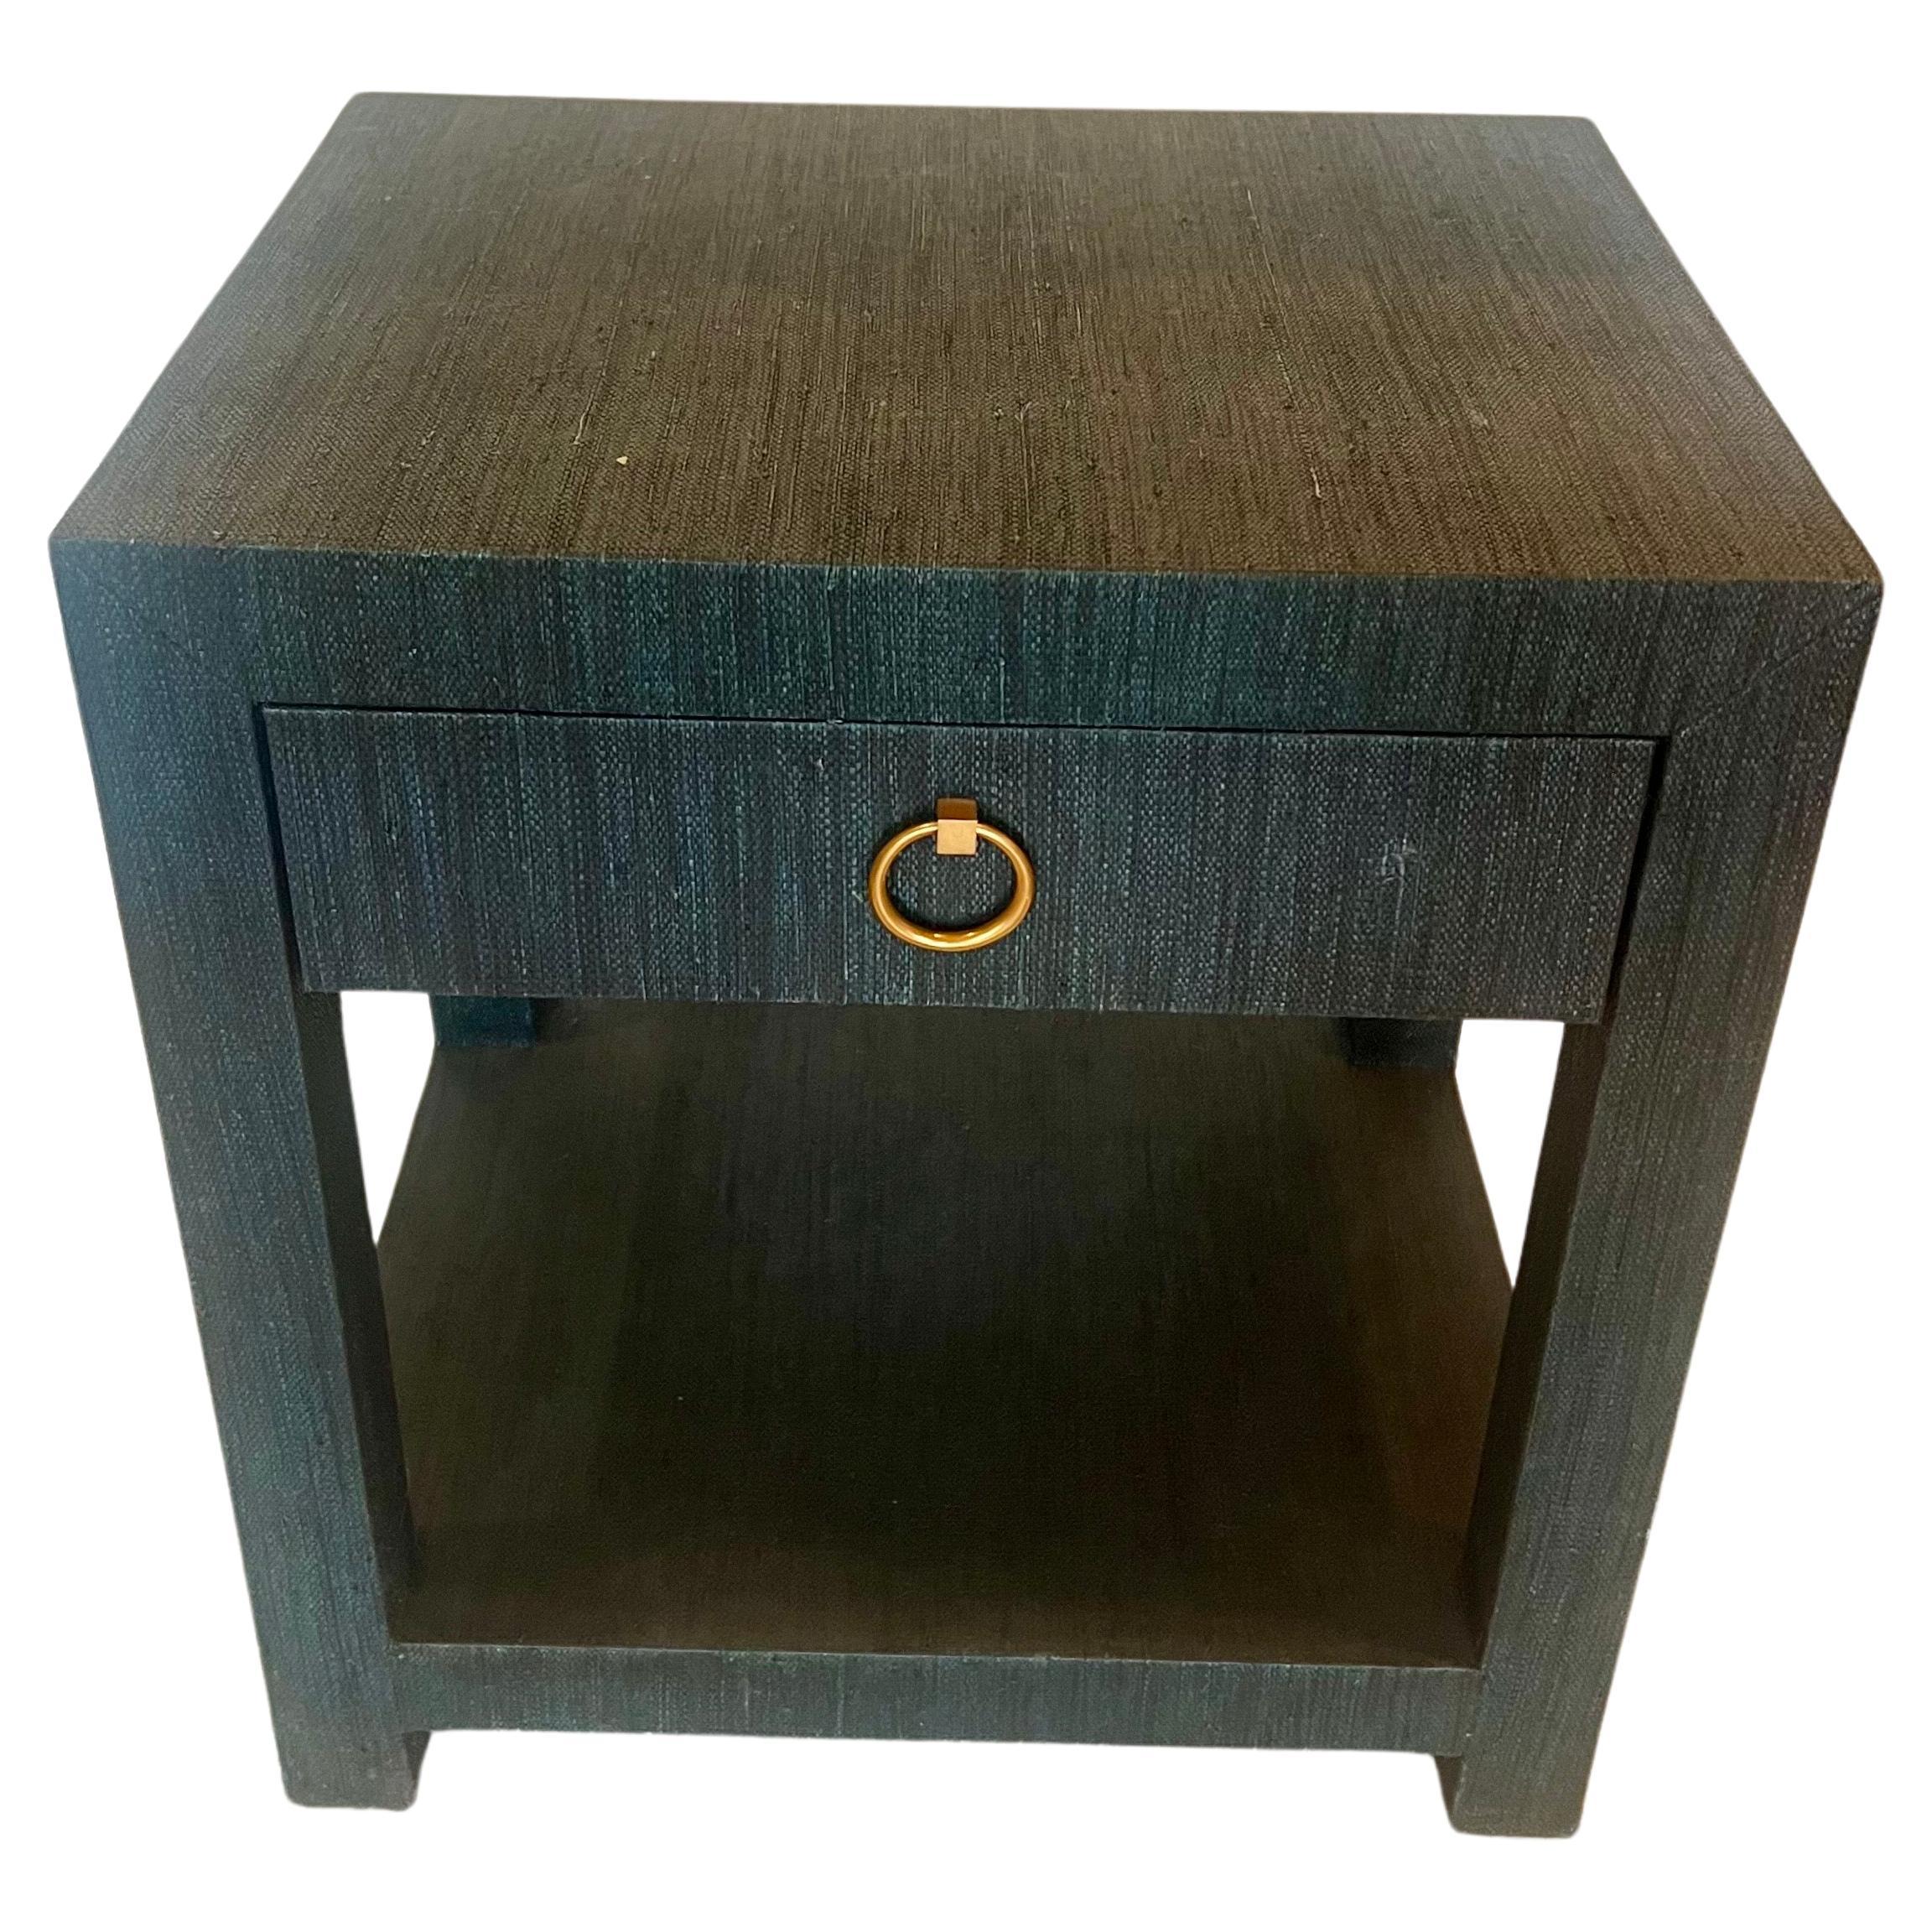 Contemporary Elegant Nightstand End Table in Linen by Serena & Lily In Excellent Condition For Sale In San Diego, CA